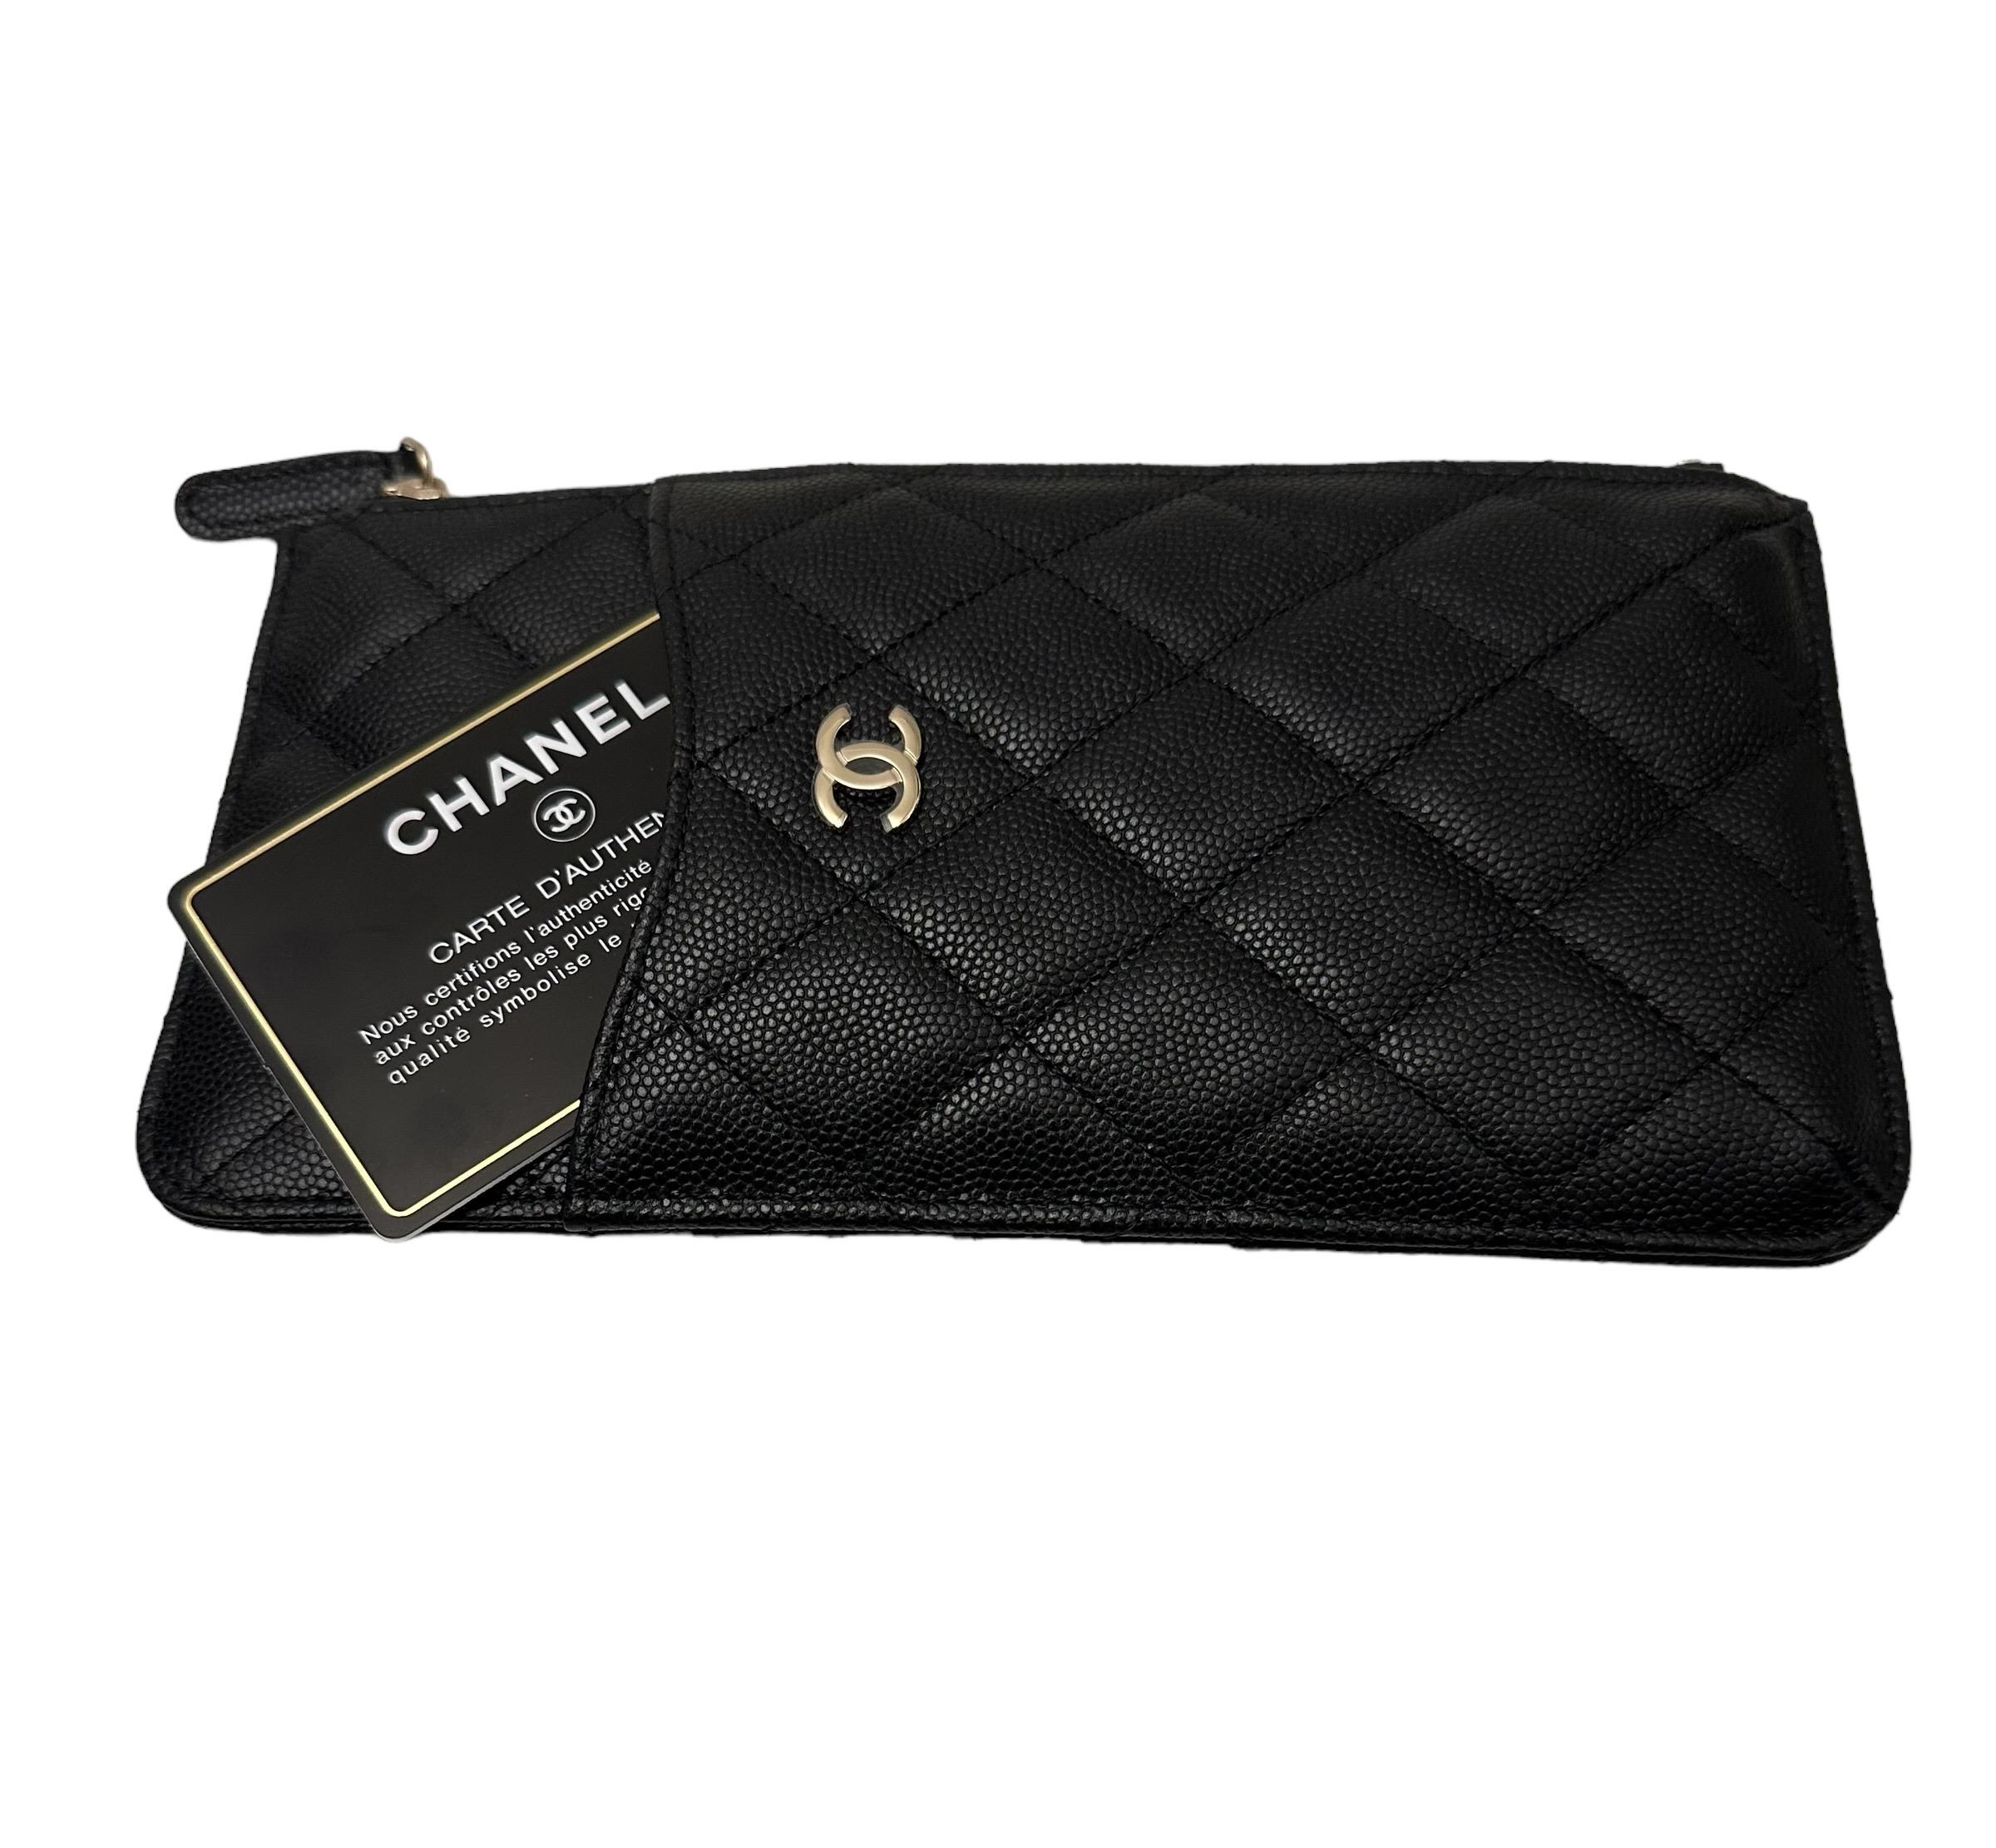 Chanel Black Caviar Leather Diamond Quilted Flat Wallet 3